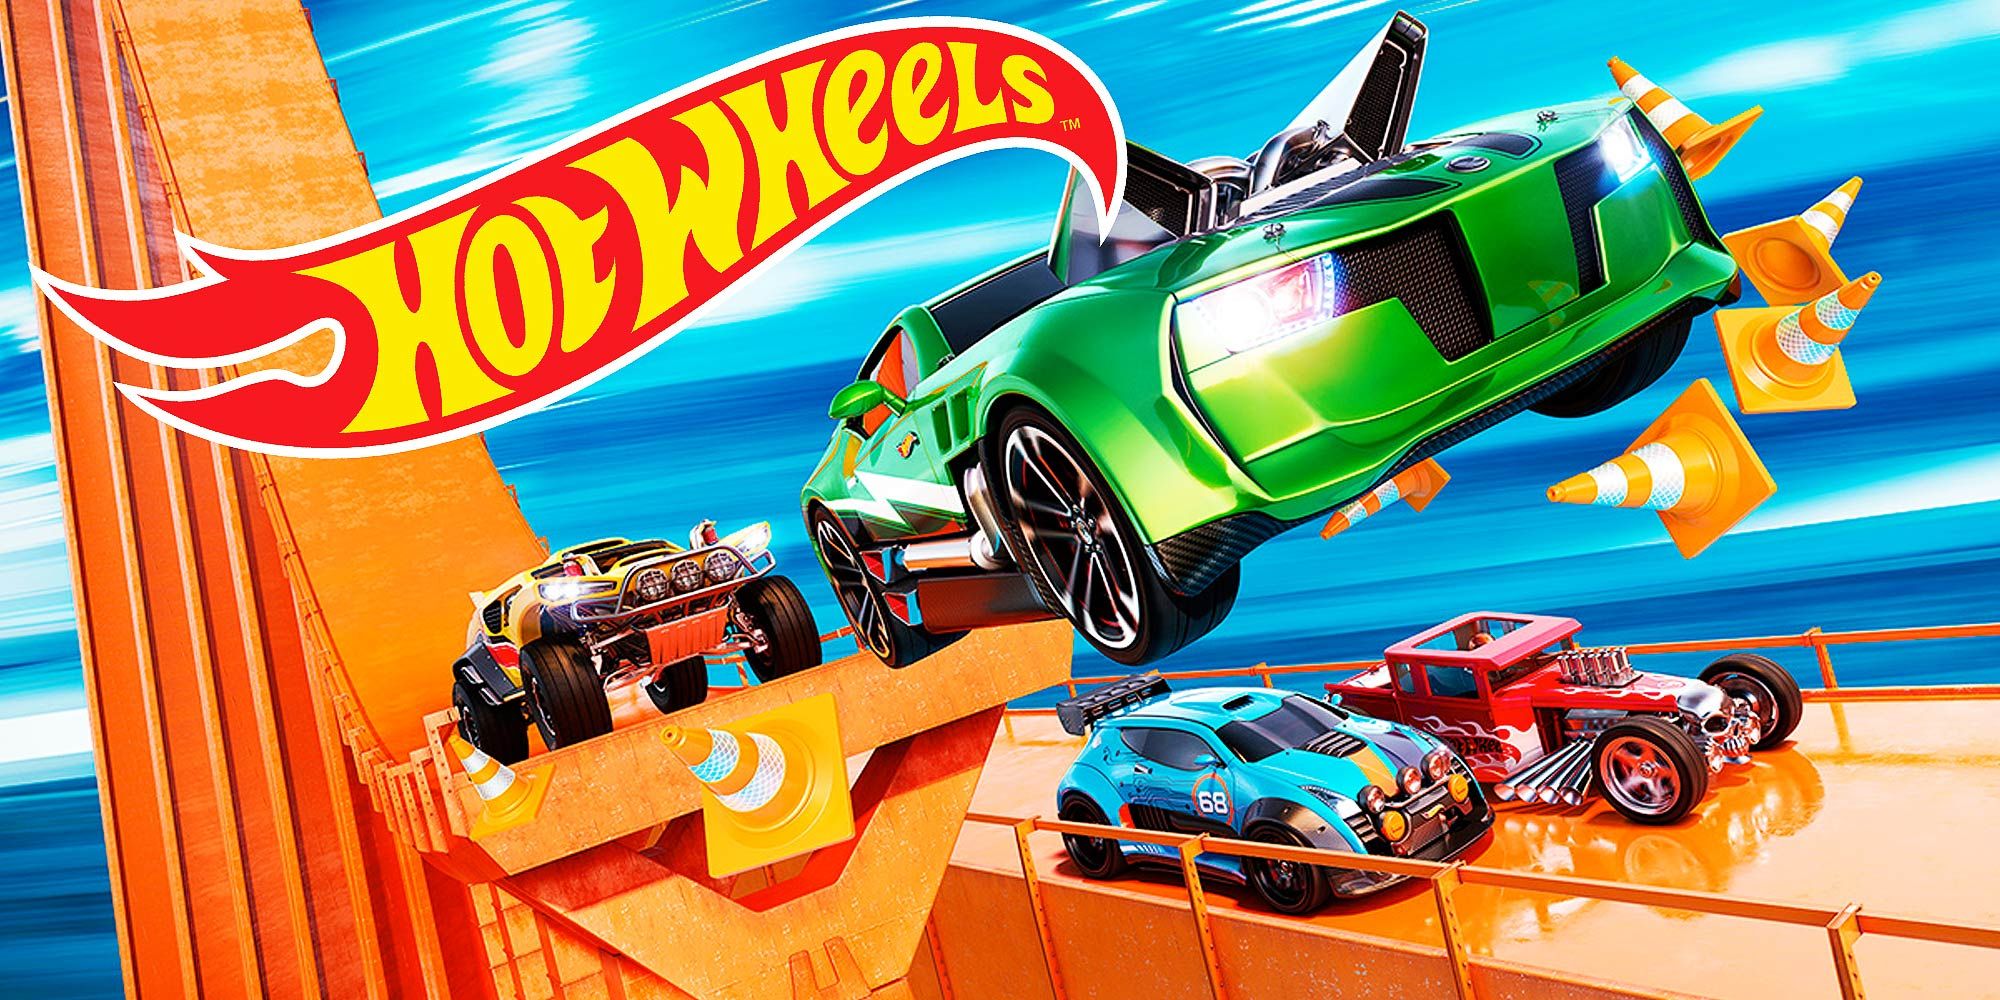 An illustration of hot wheels cars on a track